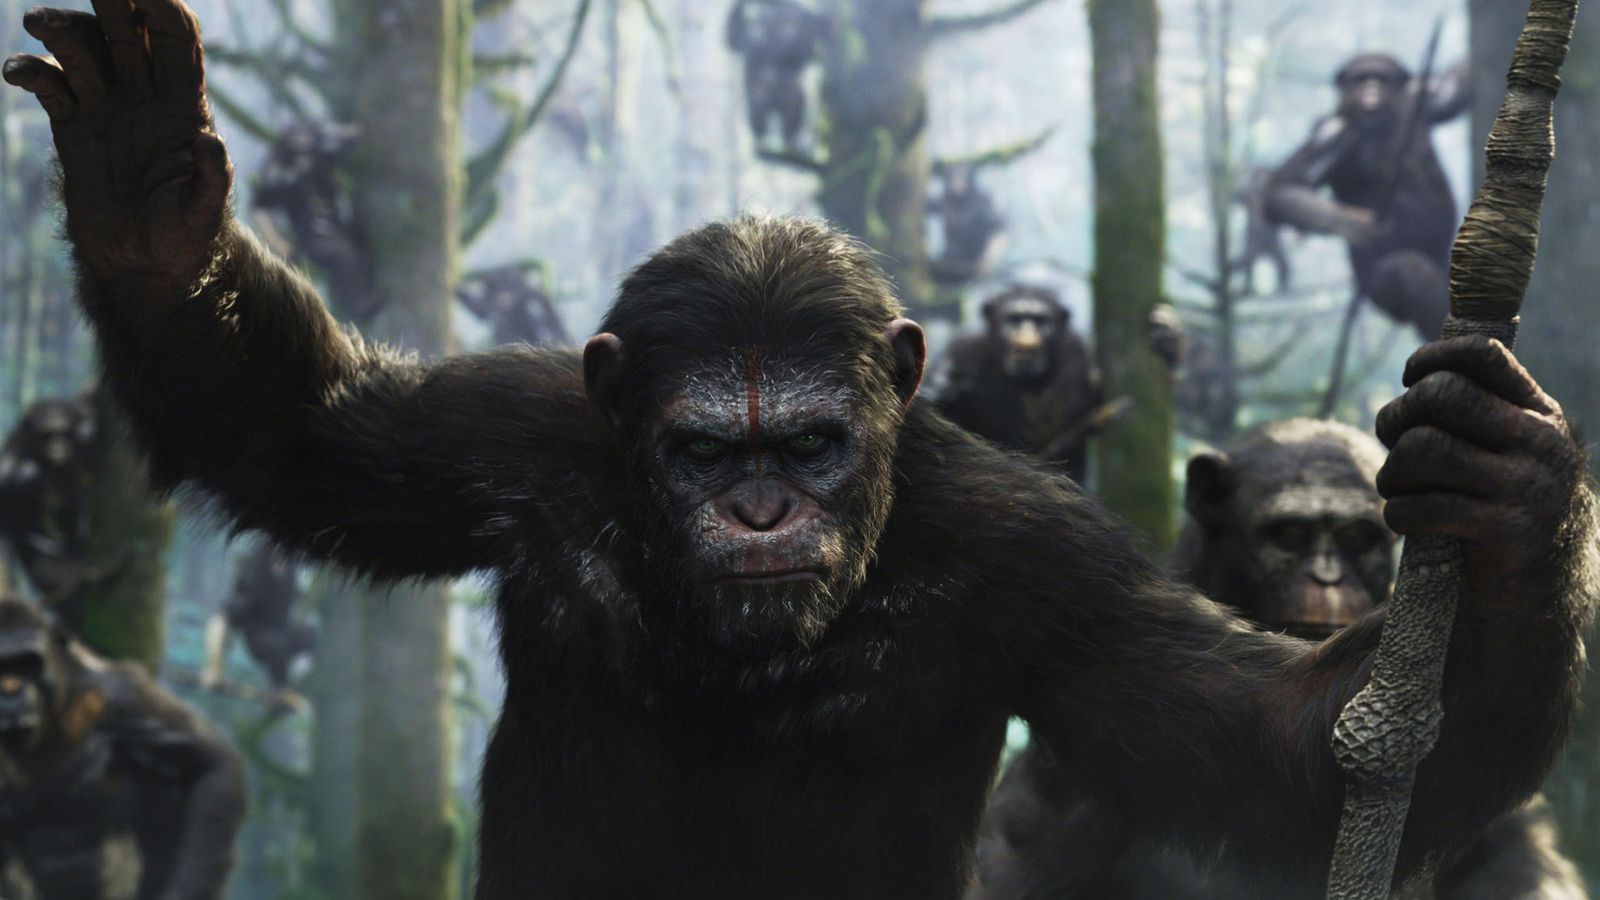 Dawn of the Planet of the Apes' review: damn dirty humans | The Verge